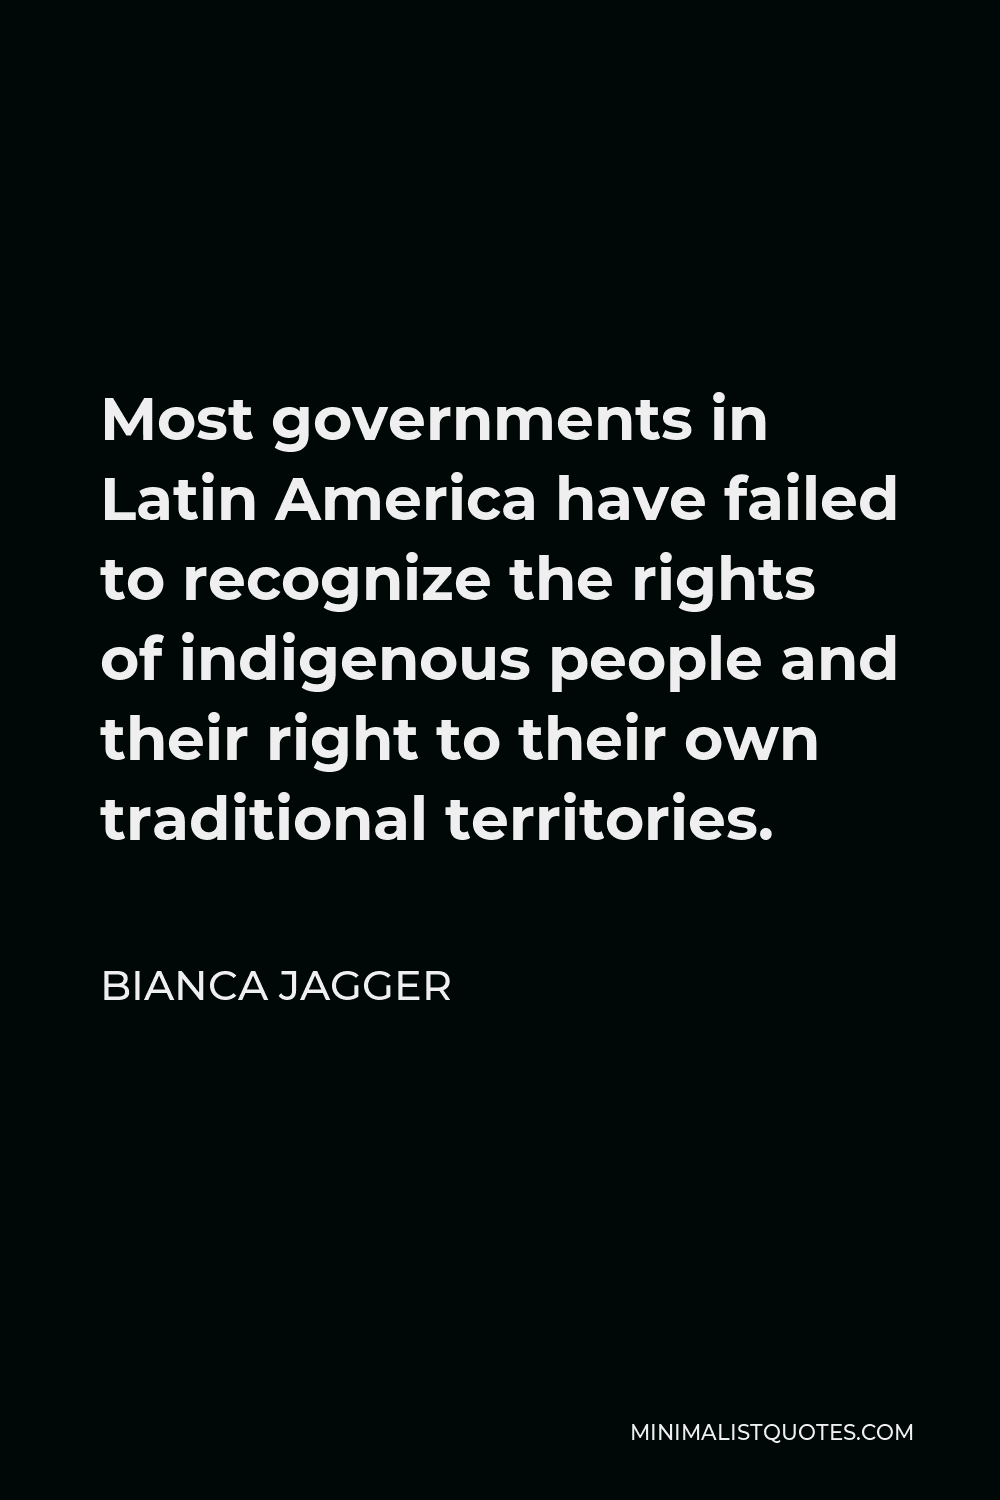 Bianca Jagger Quote - Most governments in Latin America have failed to recognize the rights of indigenous people and their right to their own traditional territories.